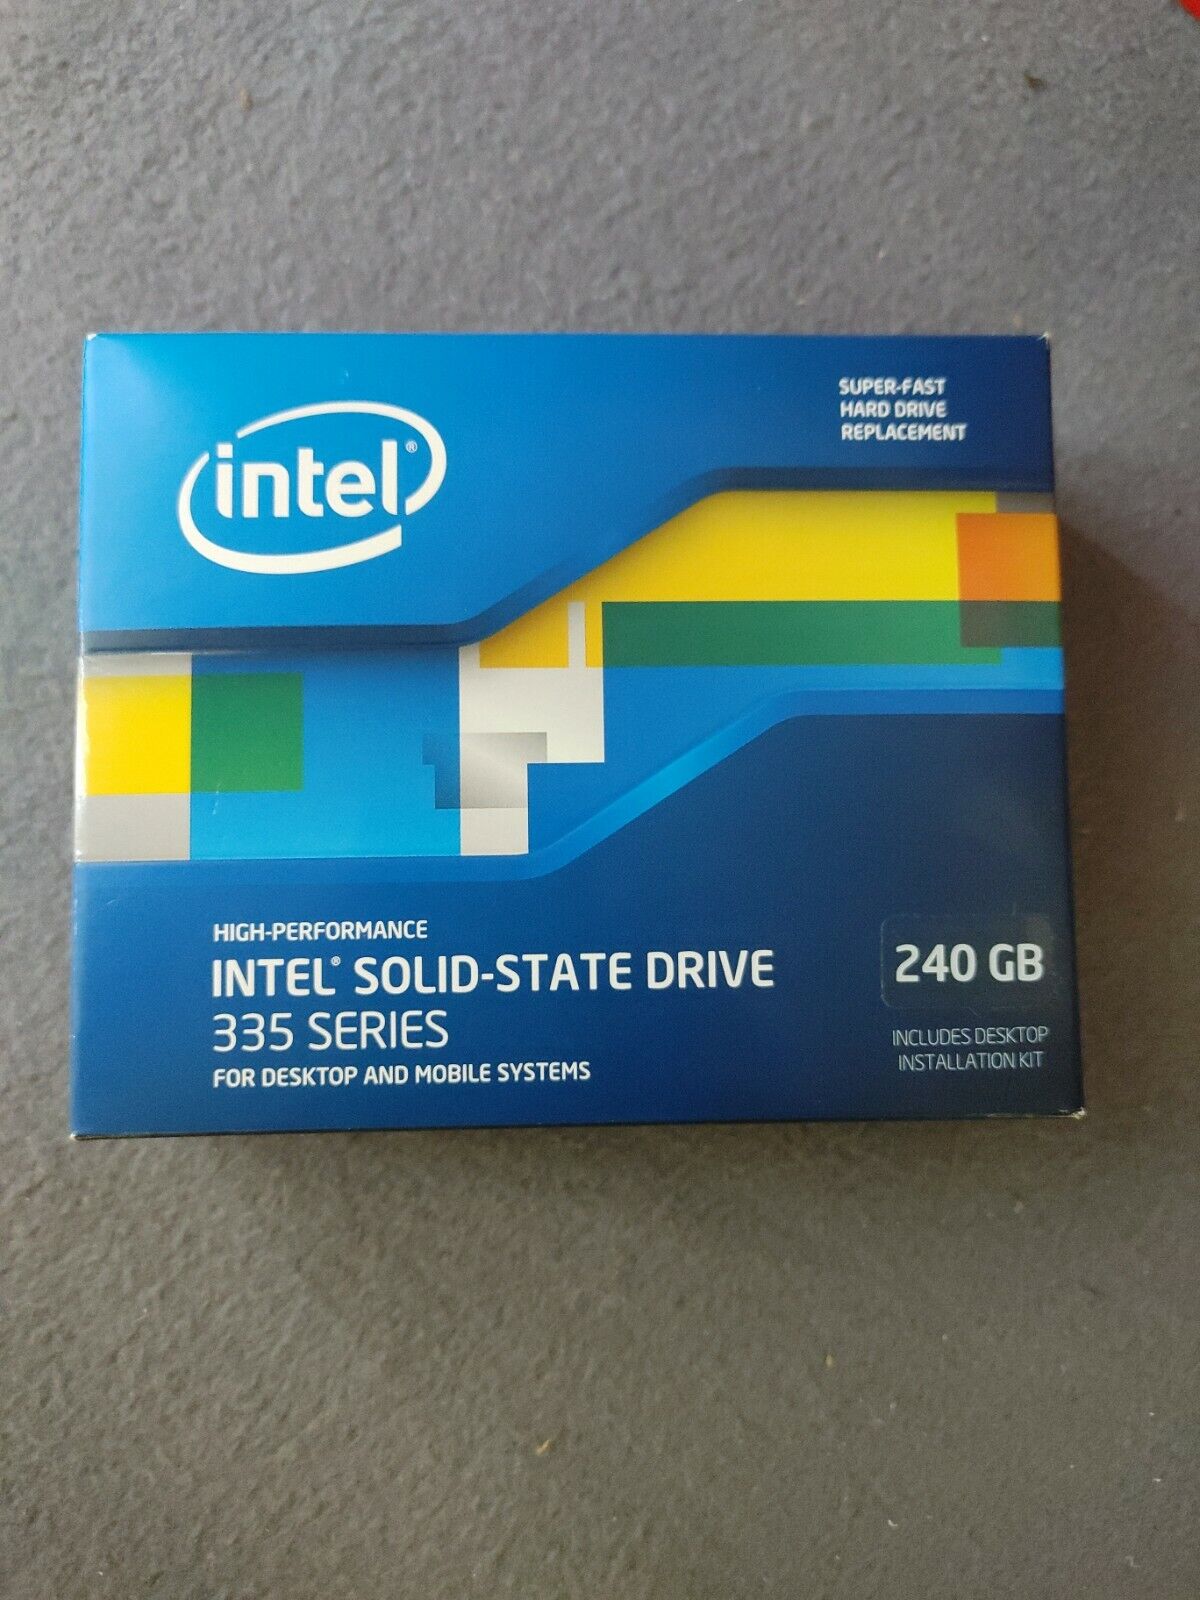 Intel 330 Series Solid-State Drive 240 GB  2.5-Inch - SSDSC2CT240A4K5 NEW SEALED